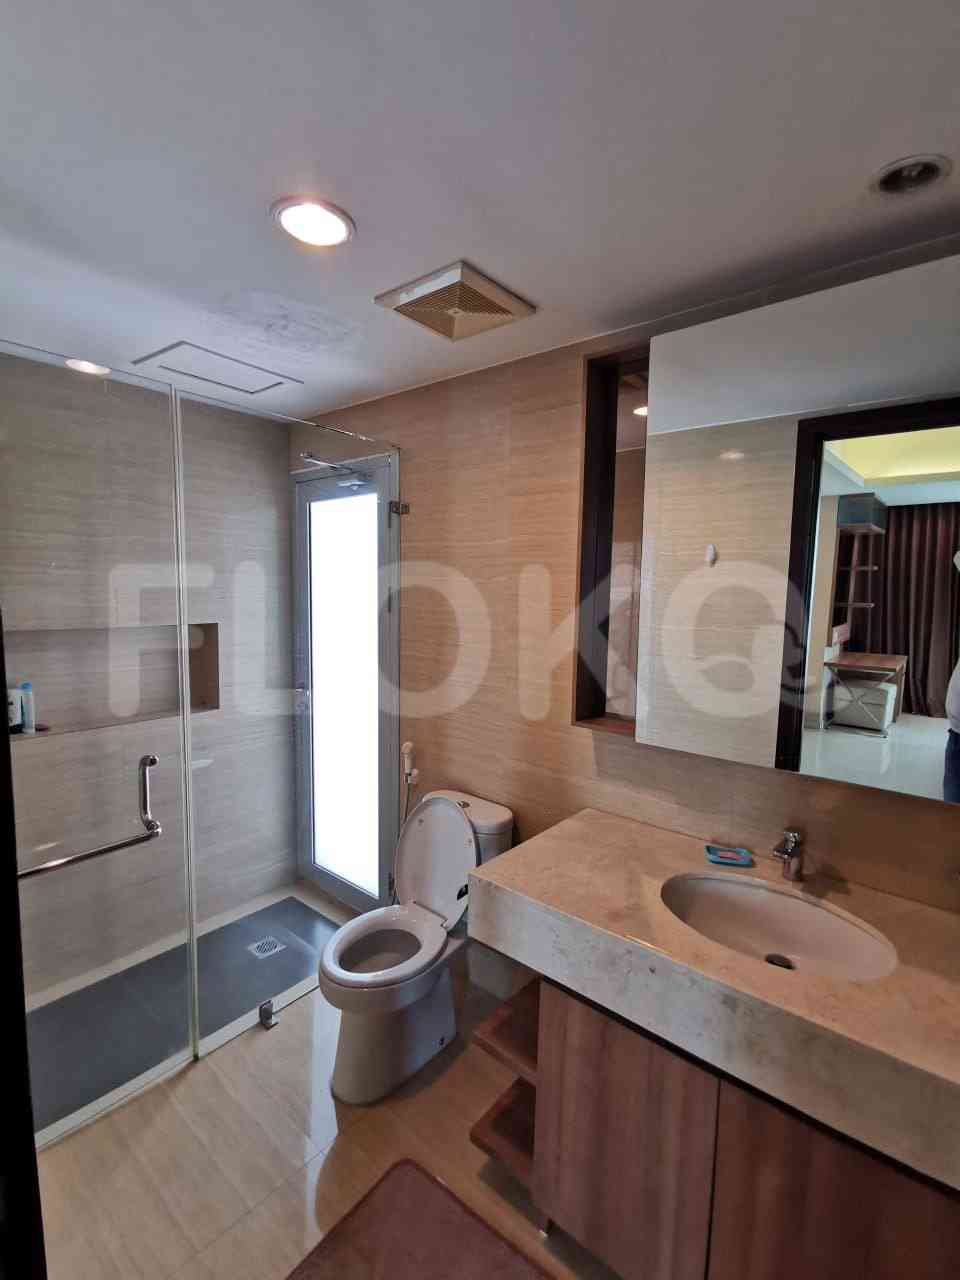 2 Bedroom on 26th Floor for Rent in Kemang Village Residence - fkea2f 9